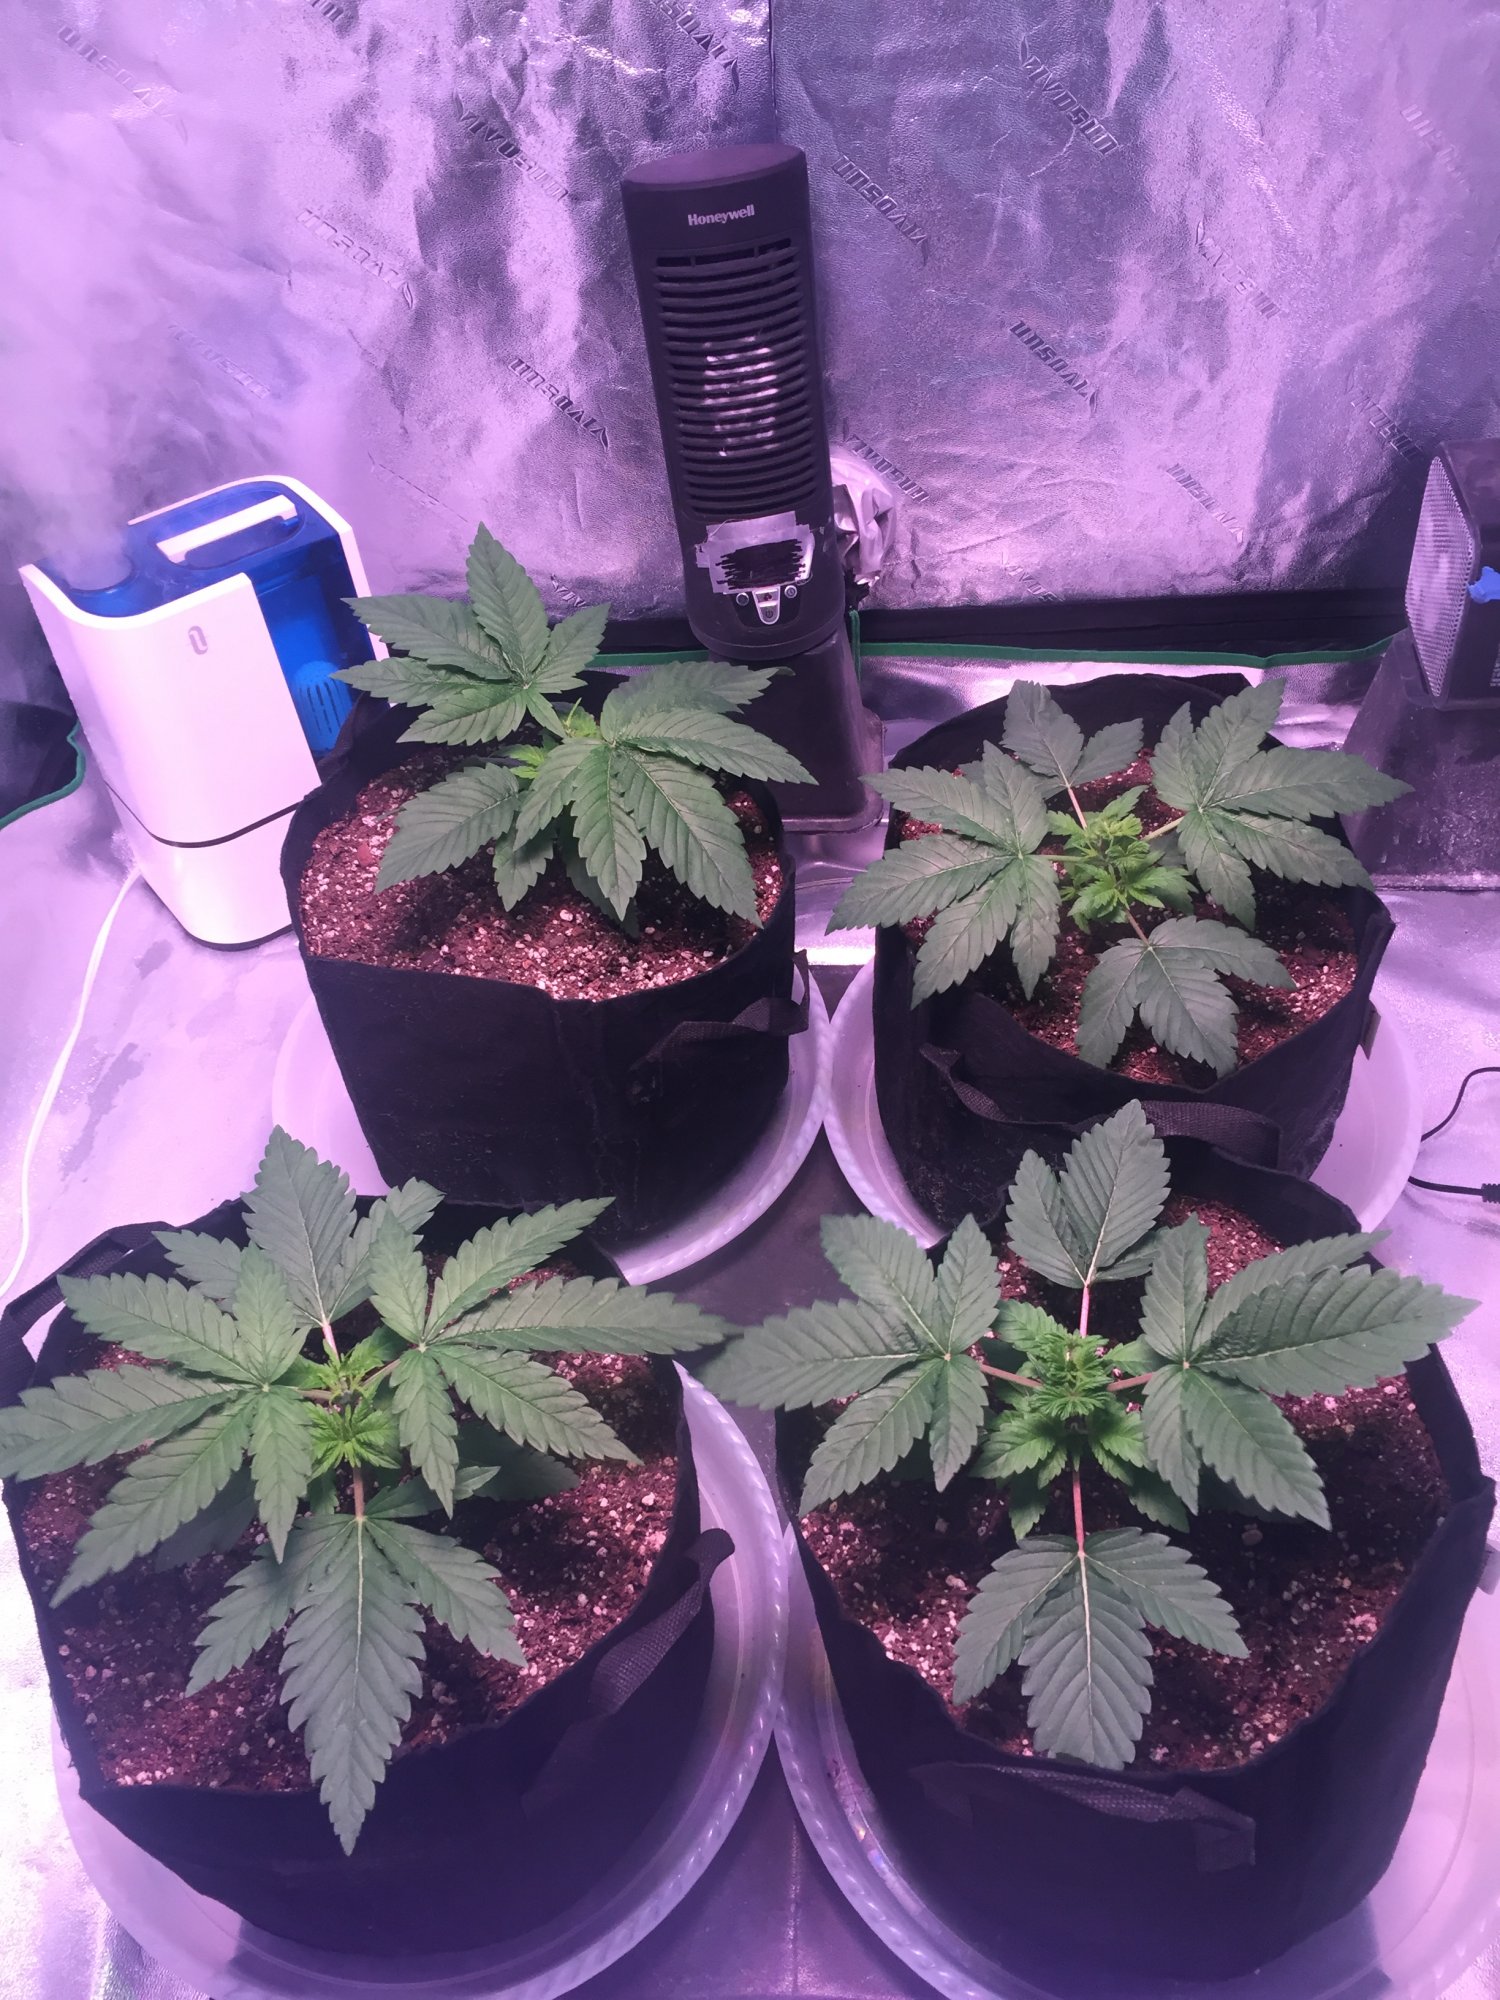 Check out my legal grow  advicetips welcomed